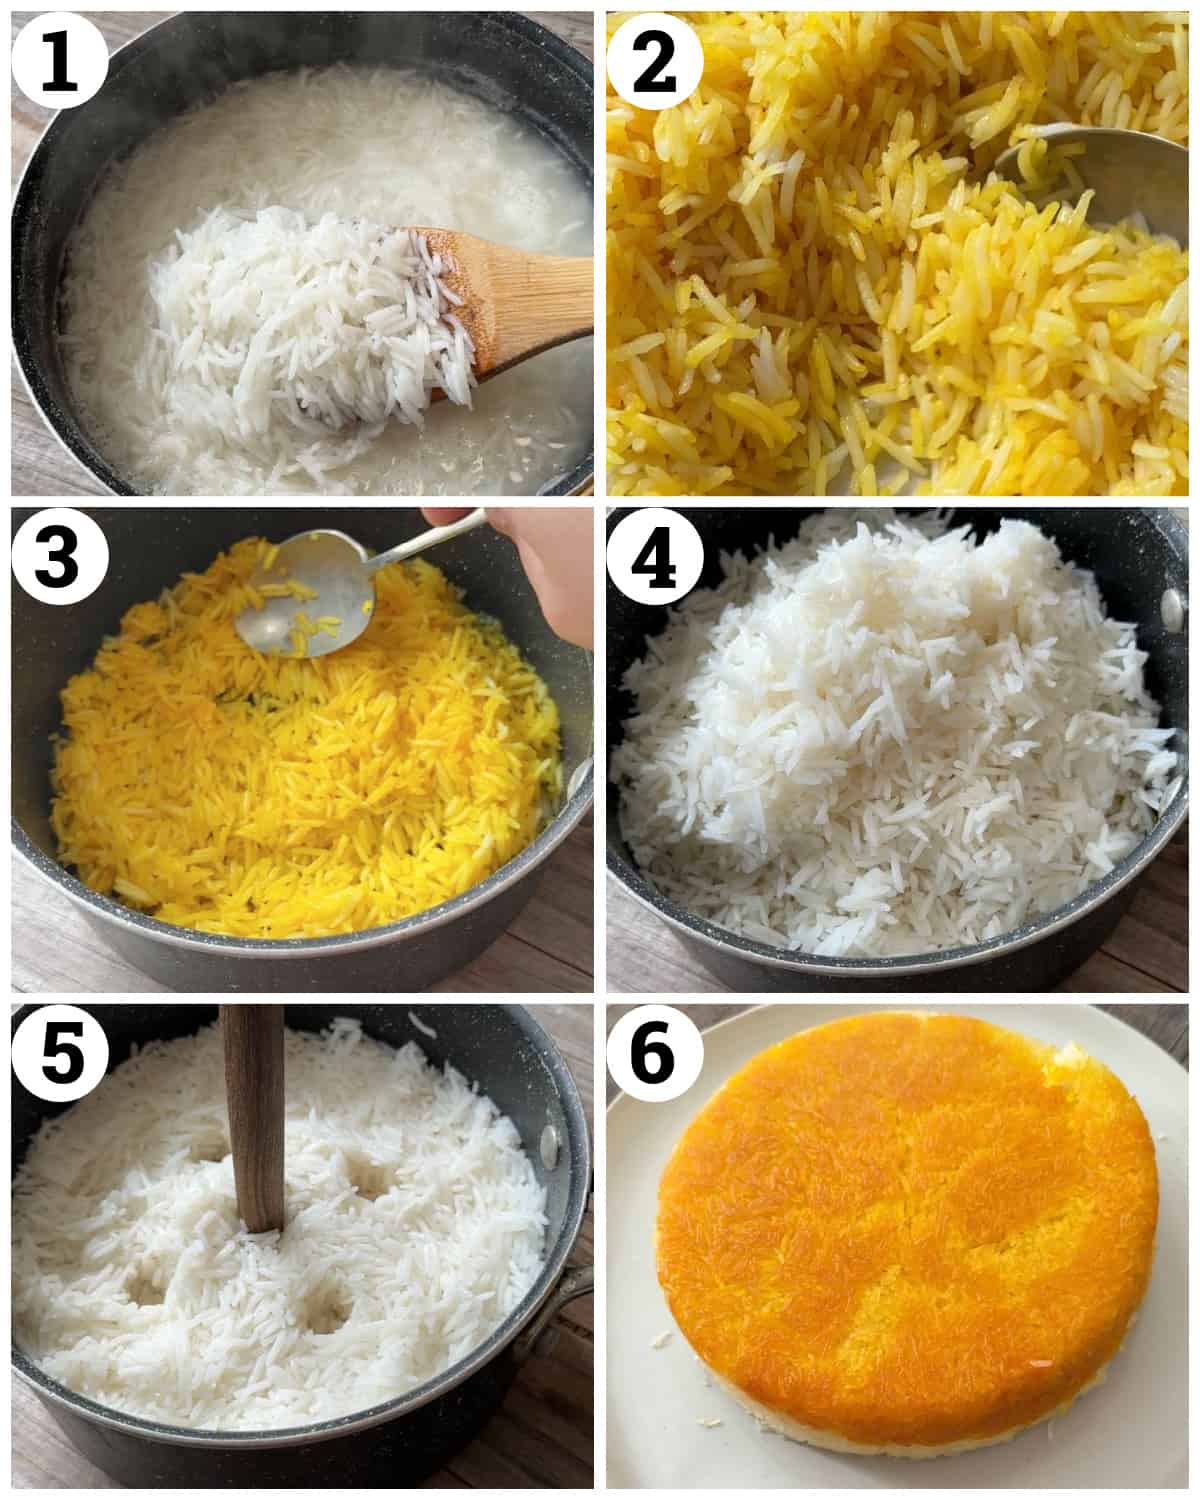 Parboil the rice and mix ½ cup with saffron. Press it at the bottom of the pot and top with more rice. Pour in the butter, wrap the lid in a kitchen towel  and cook for 25 minutes. 